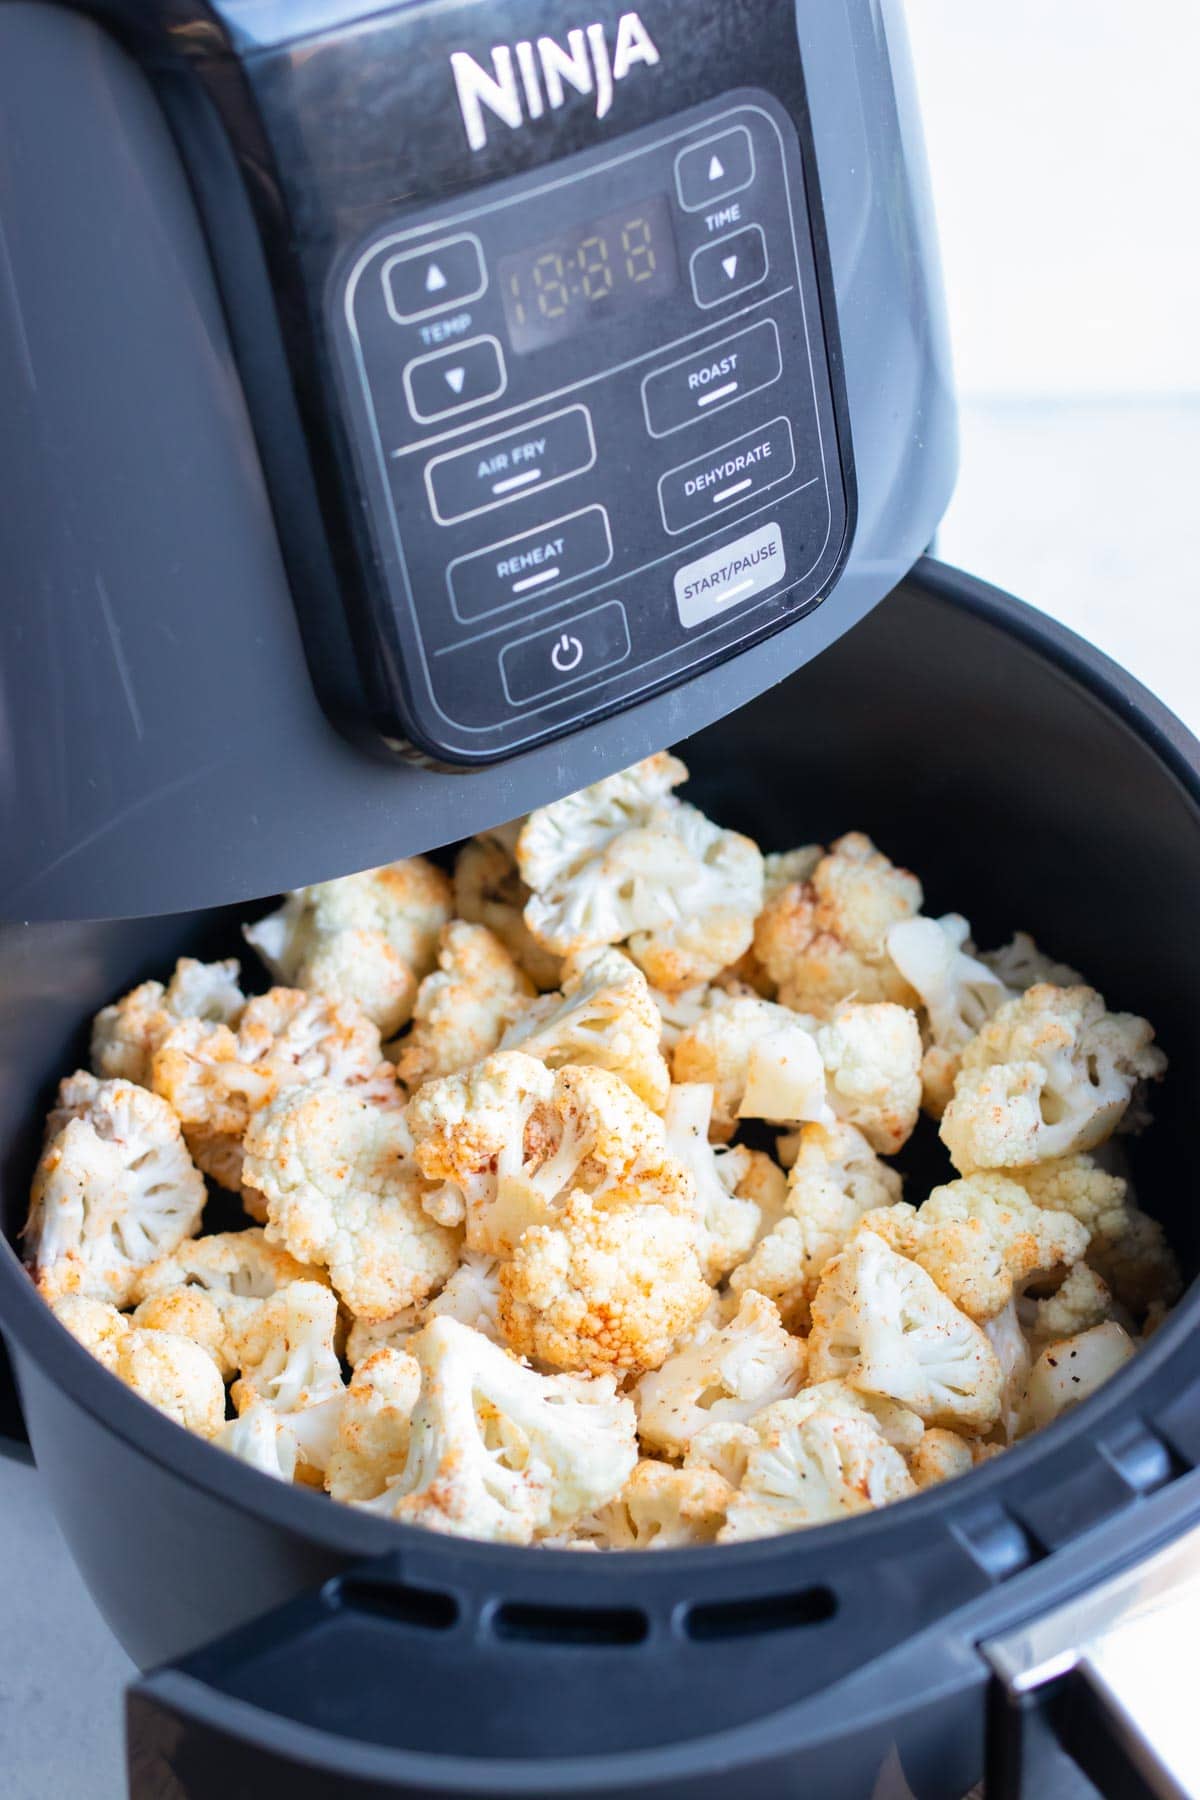 Seasoned cauliflower florets are placed in the air fryer.